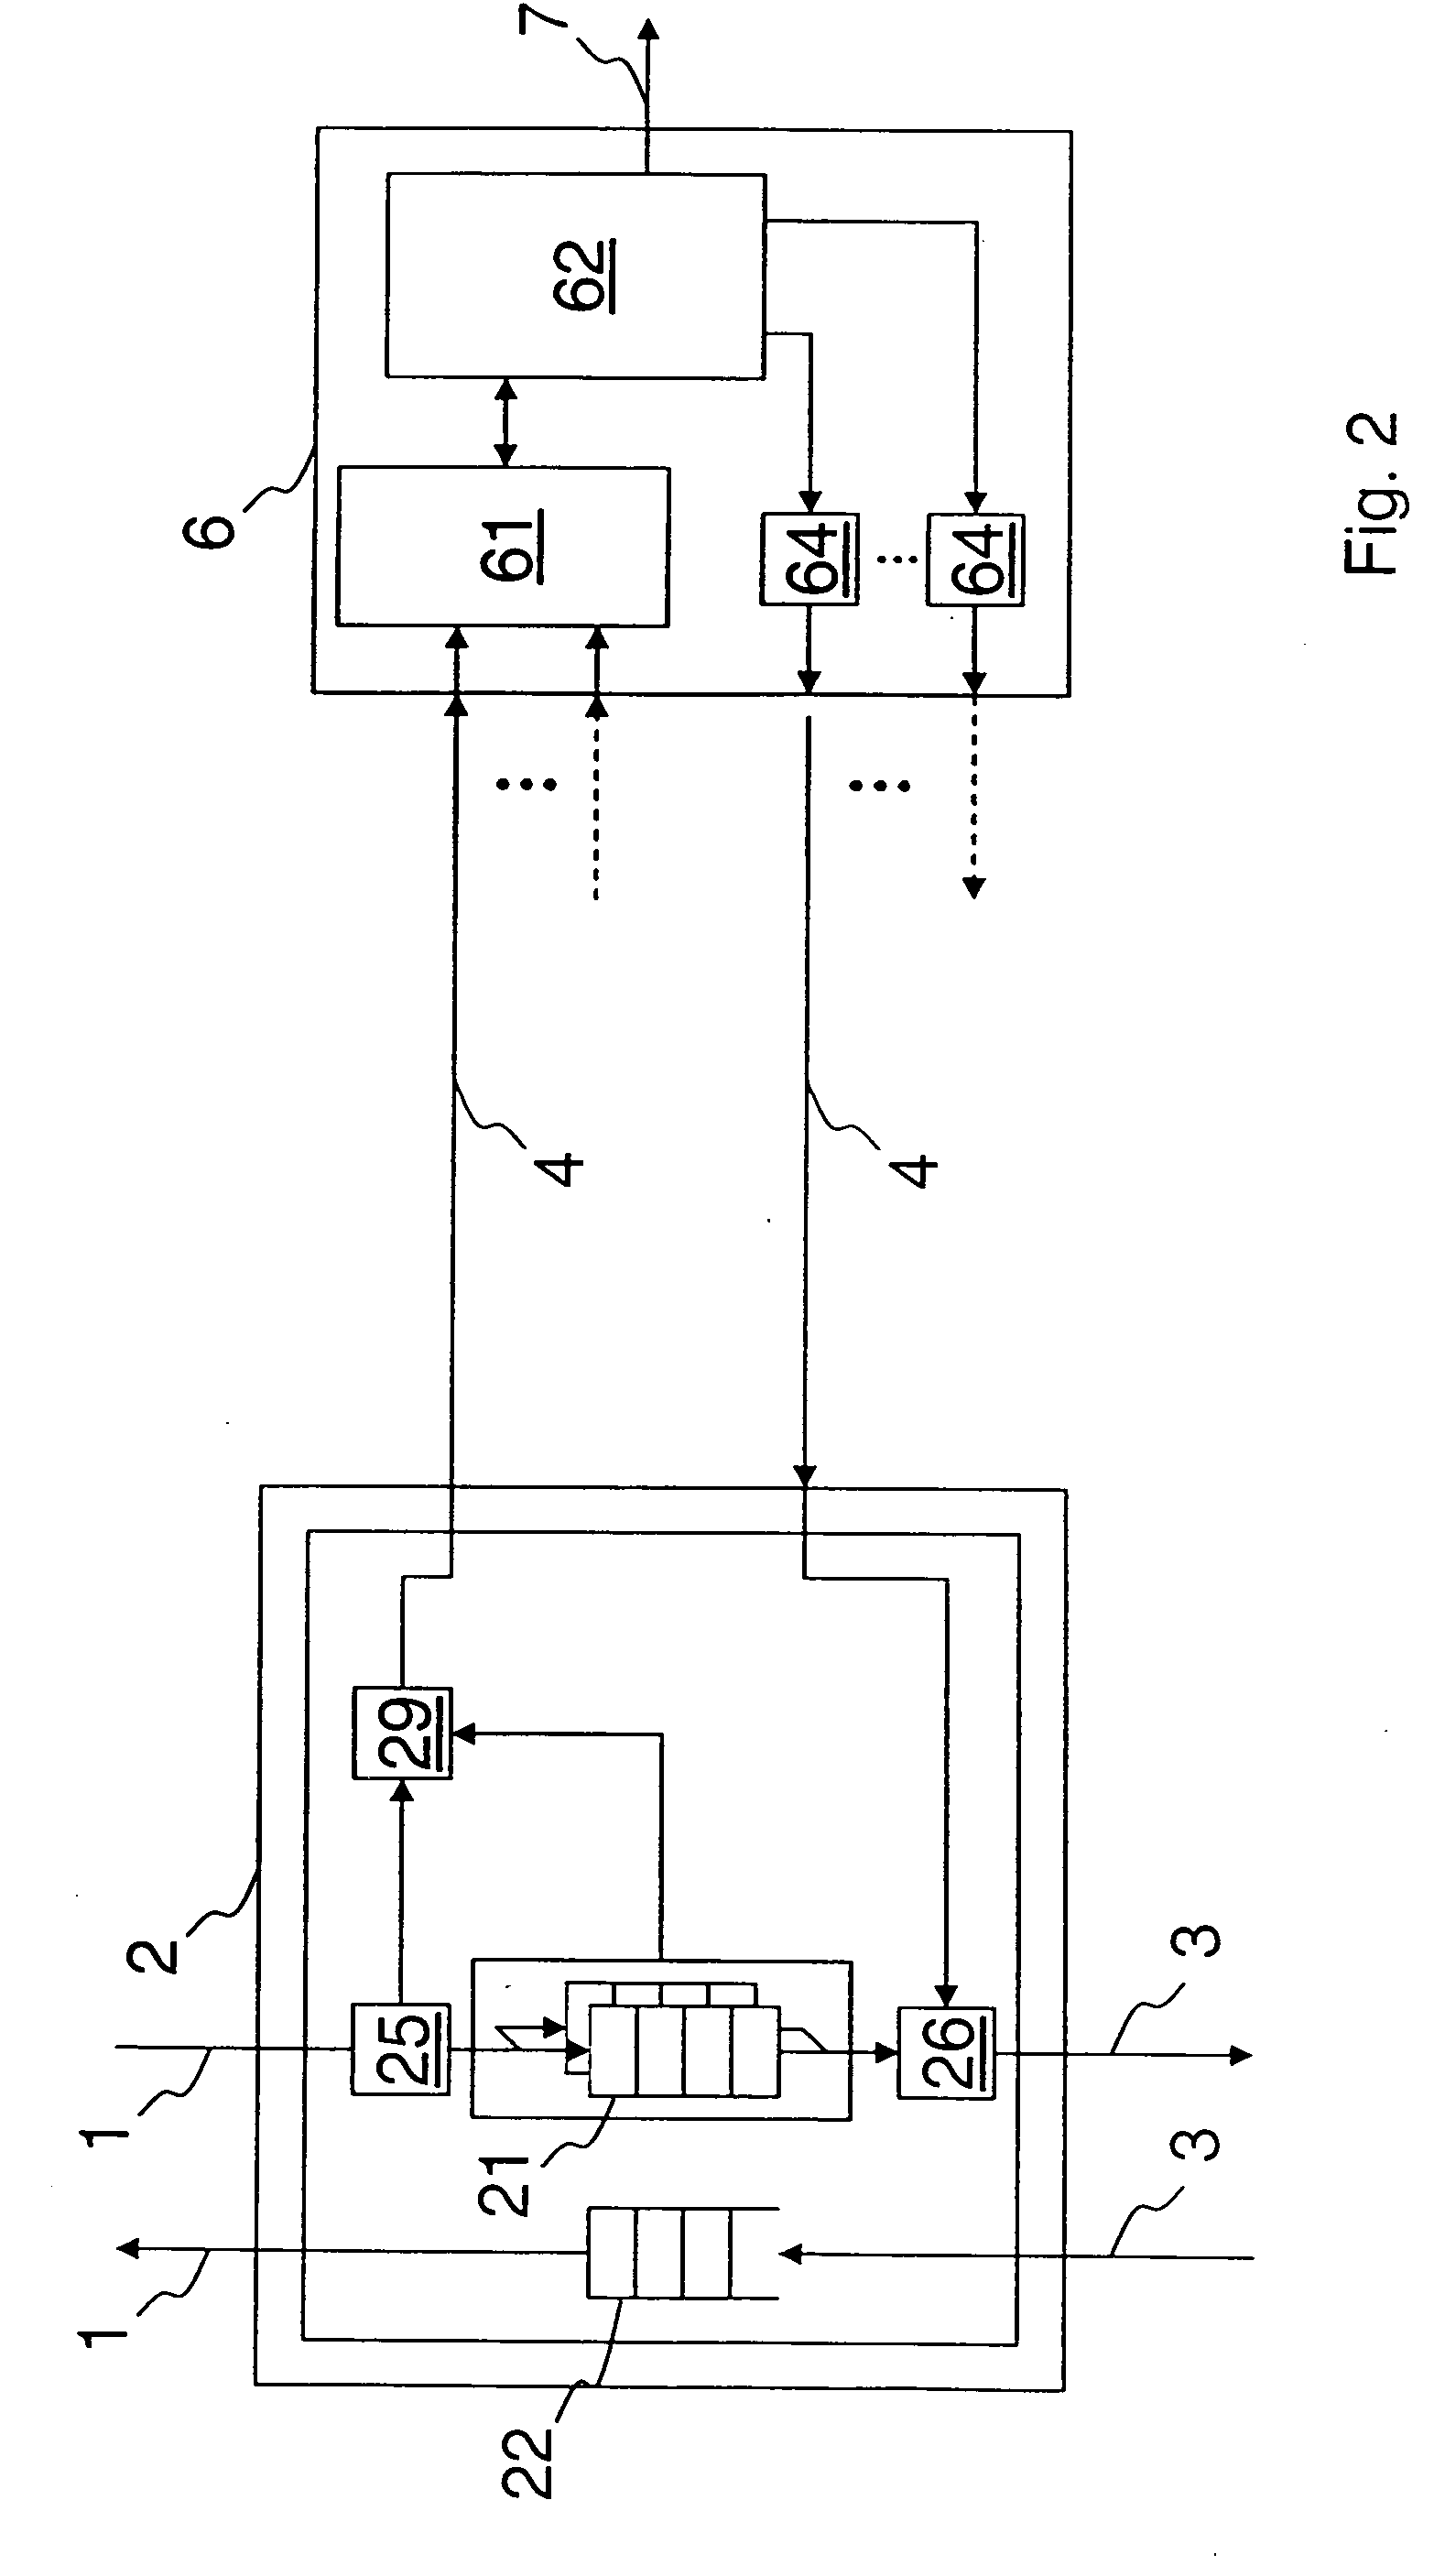 Method and allocation device for allocating pending requests for data packet transmission at a number of inputs to a number of outputs of a packet switching device in successive time slots